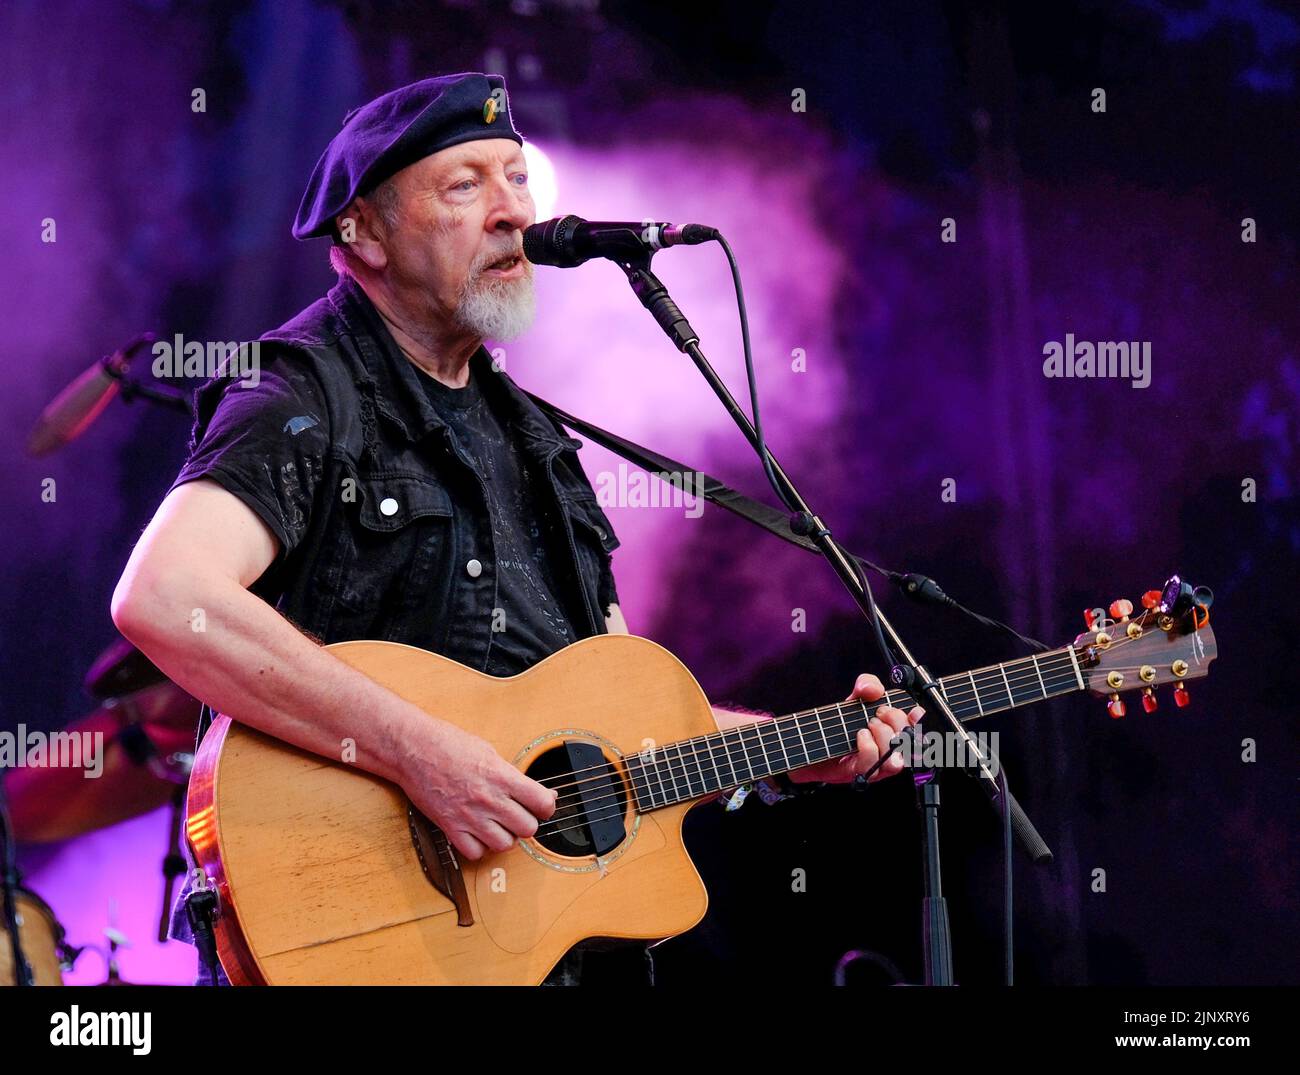 Cropredy Oxfordshire UK... Richard Thompson performing on the Main Stage at this years Fairport Cropredy Convention. Credit: charlie bryan/Alamy Live News Stock Photo